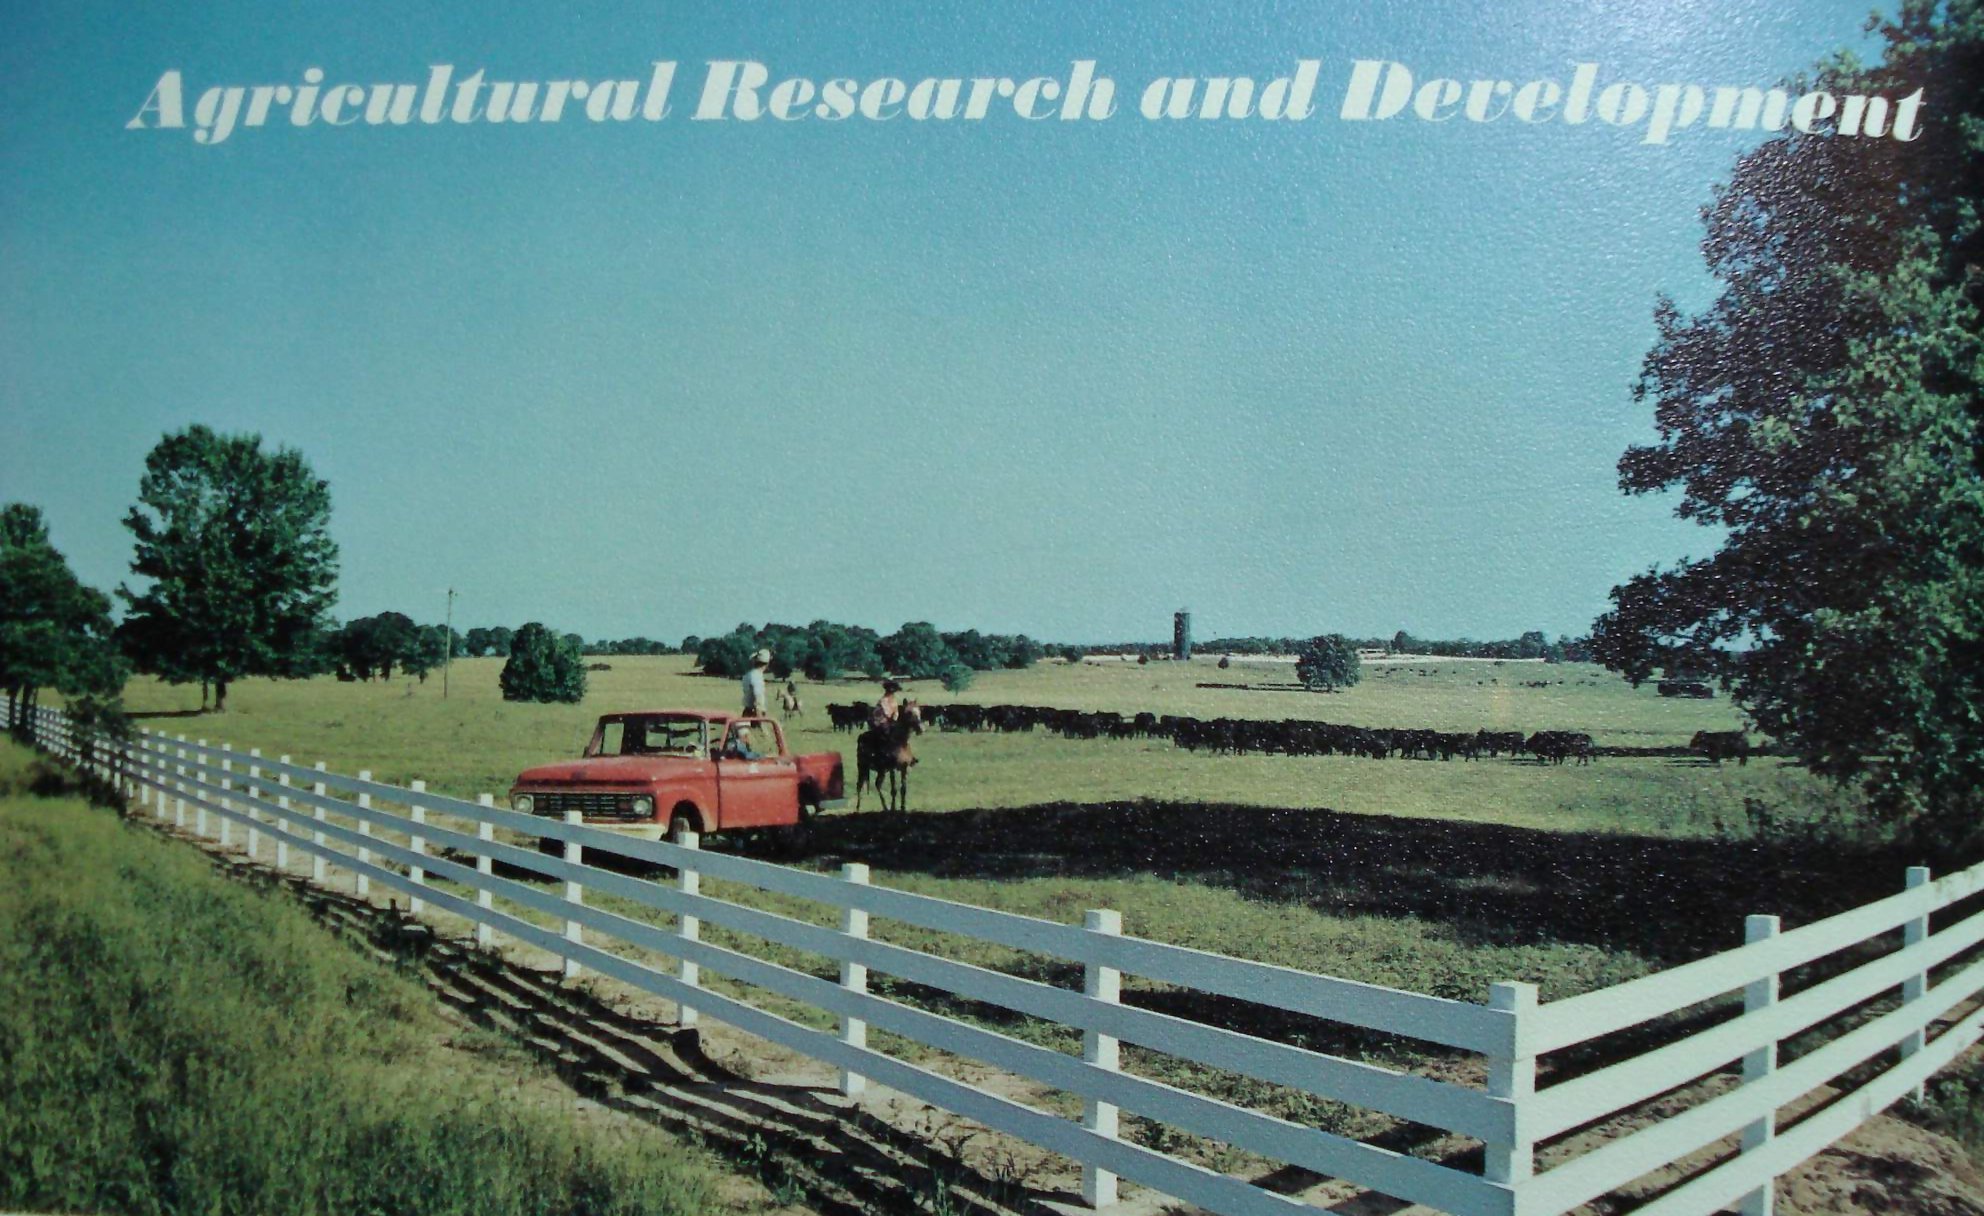 Ambassador Research Farm - Restored pastures and cattle